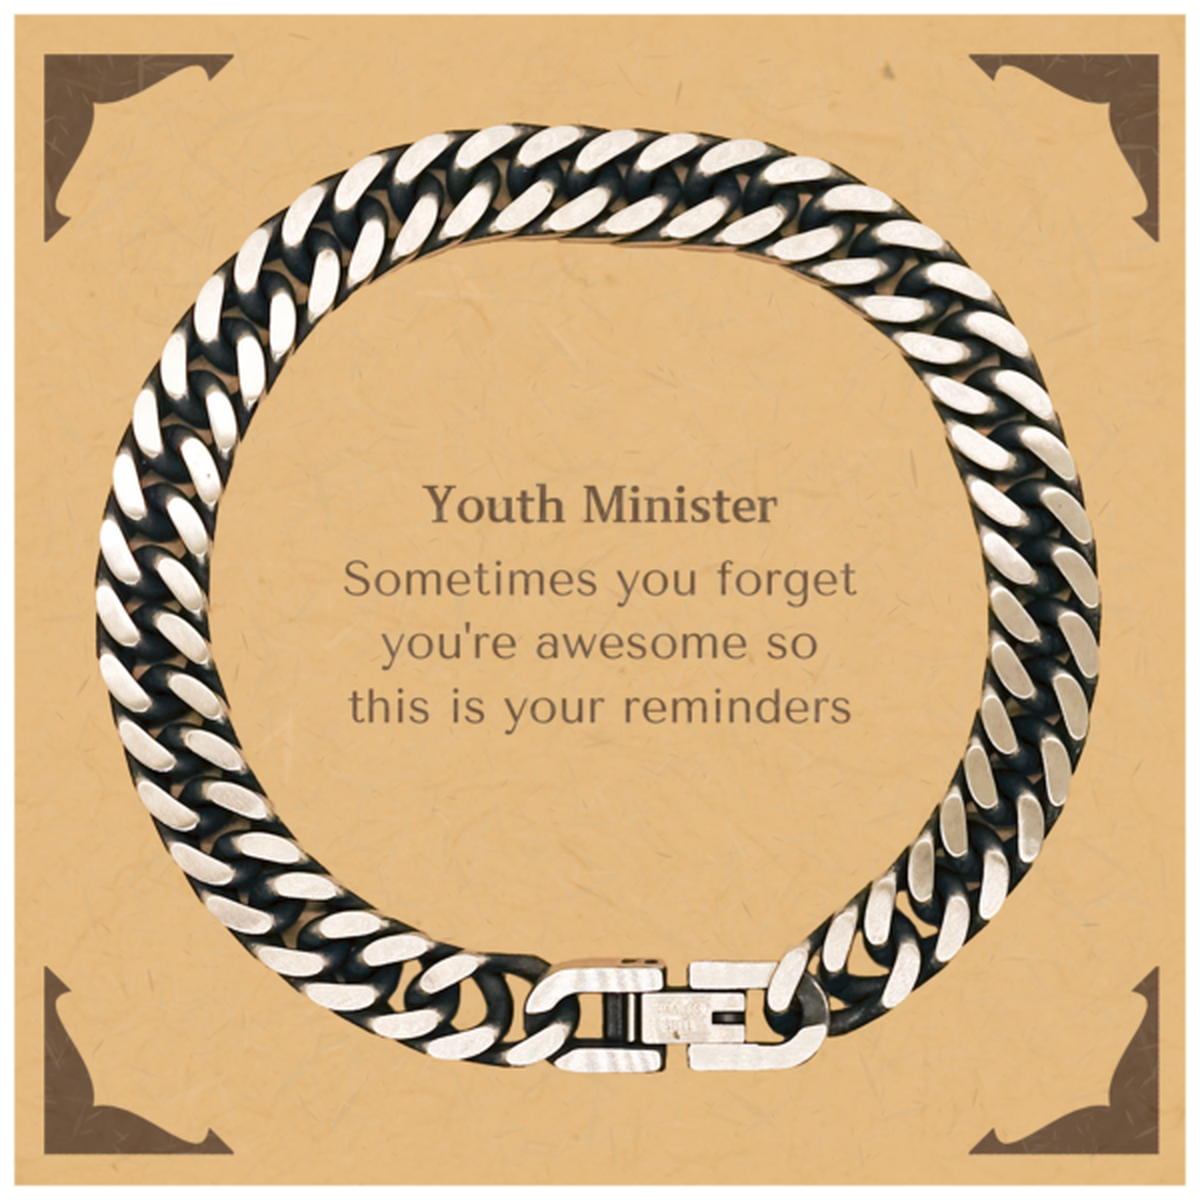 Sentimental Youth Minister Cuban Link Chain Bracelet, Youth Minister Sometimes you forget you're awesome so this is your reminders, Graduation Christmas Birthday Gifts for Youth Minister, Men, Women, Coworkers